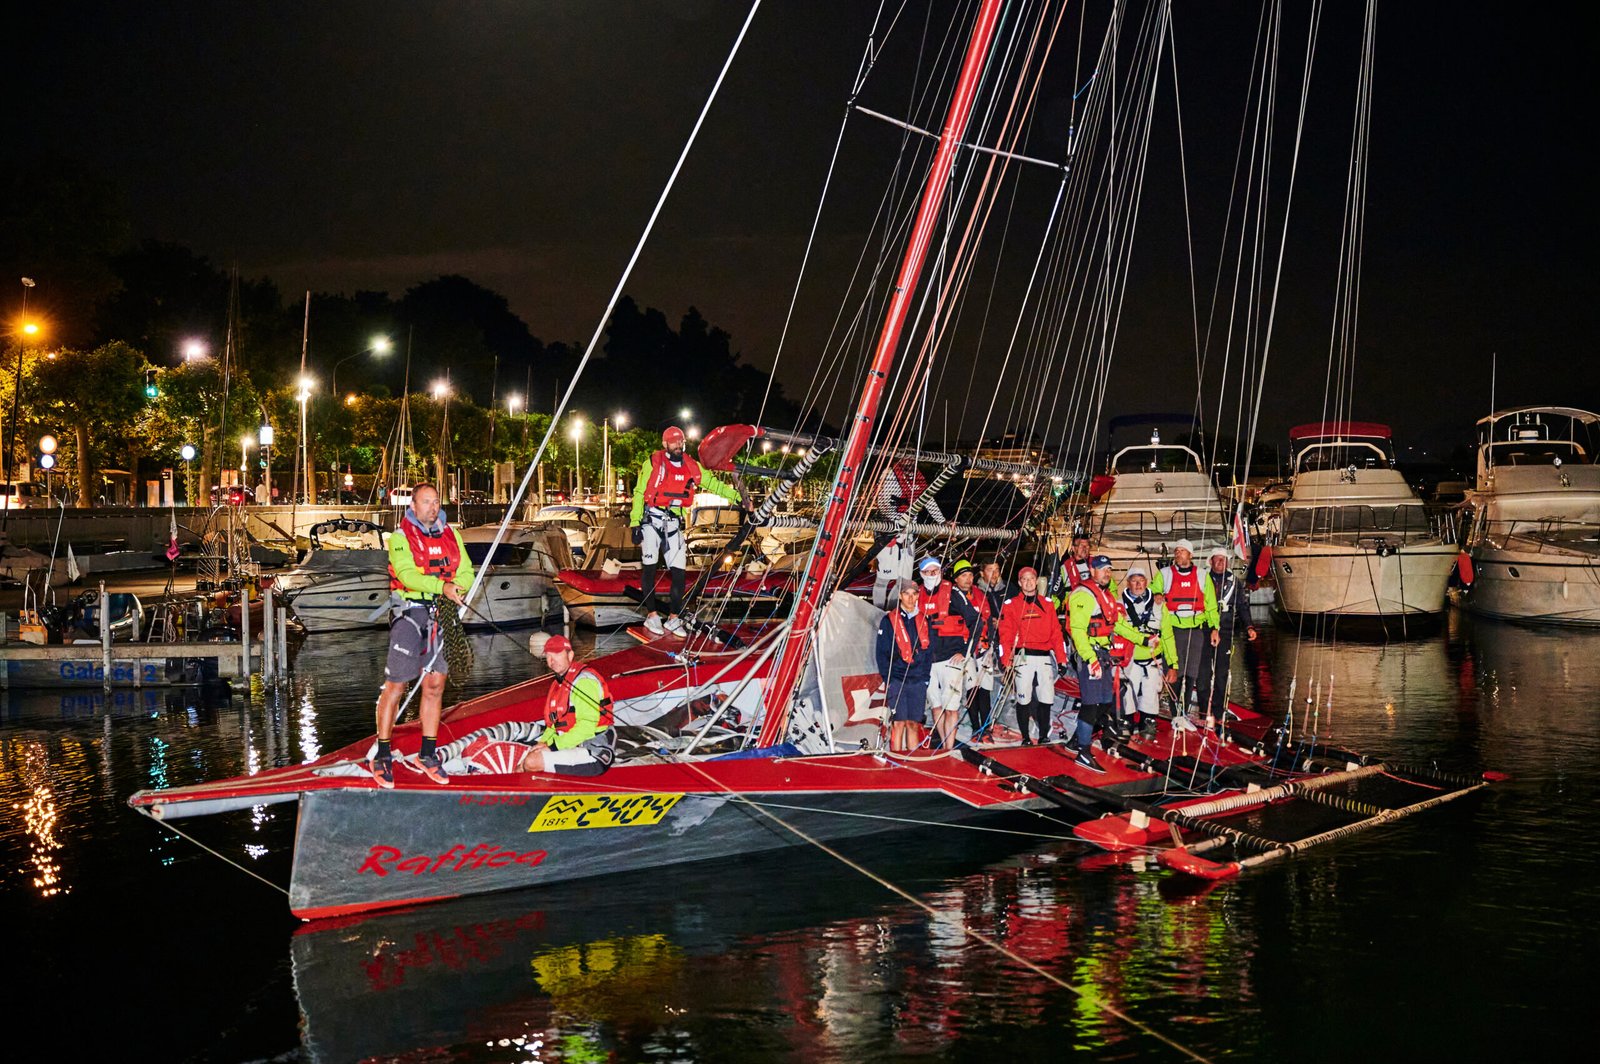 BOL D’OR MIRABAUD : AFTER AN OUTSTANDING VICTORY BY CHRISTIAN WAHL, 2023 BECKONS